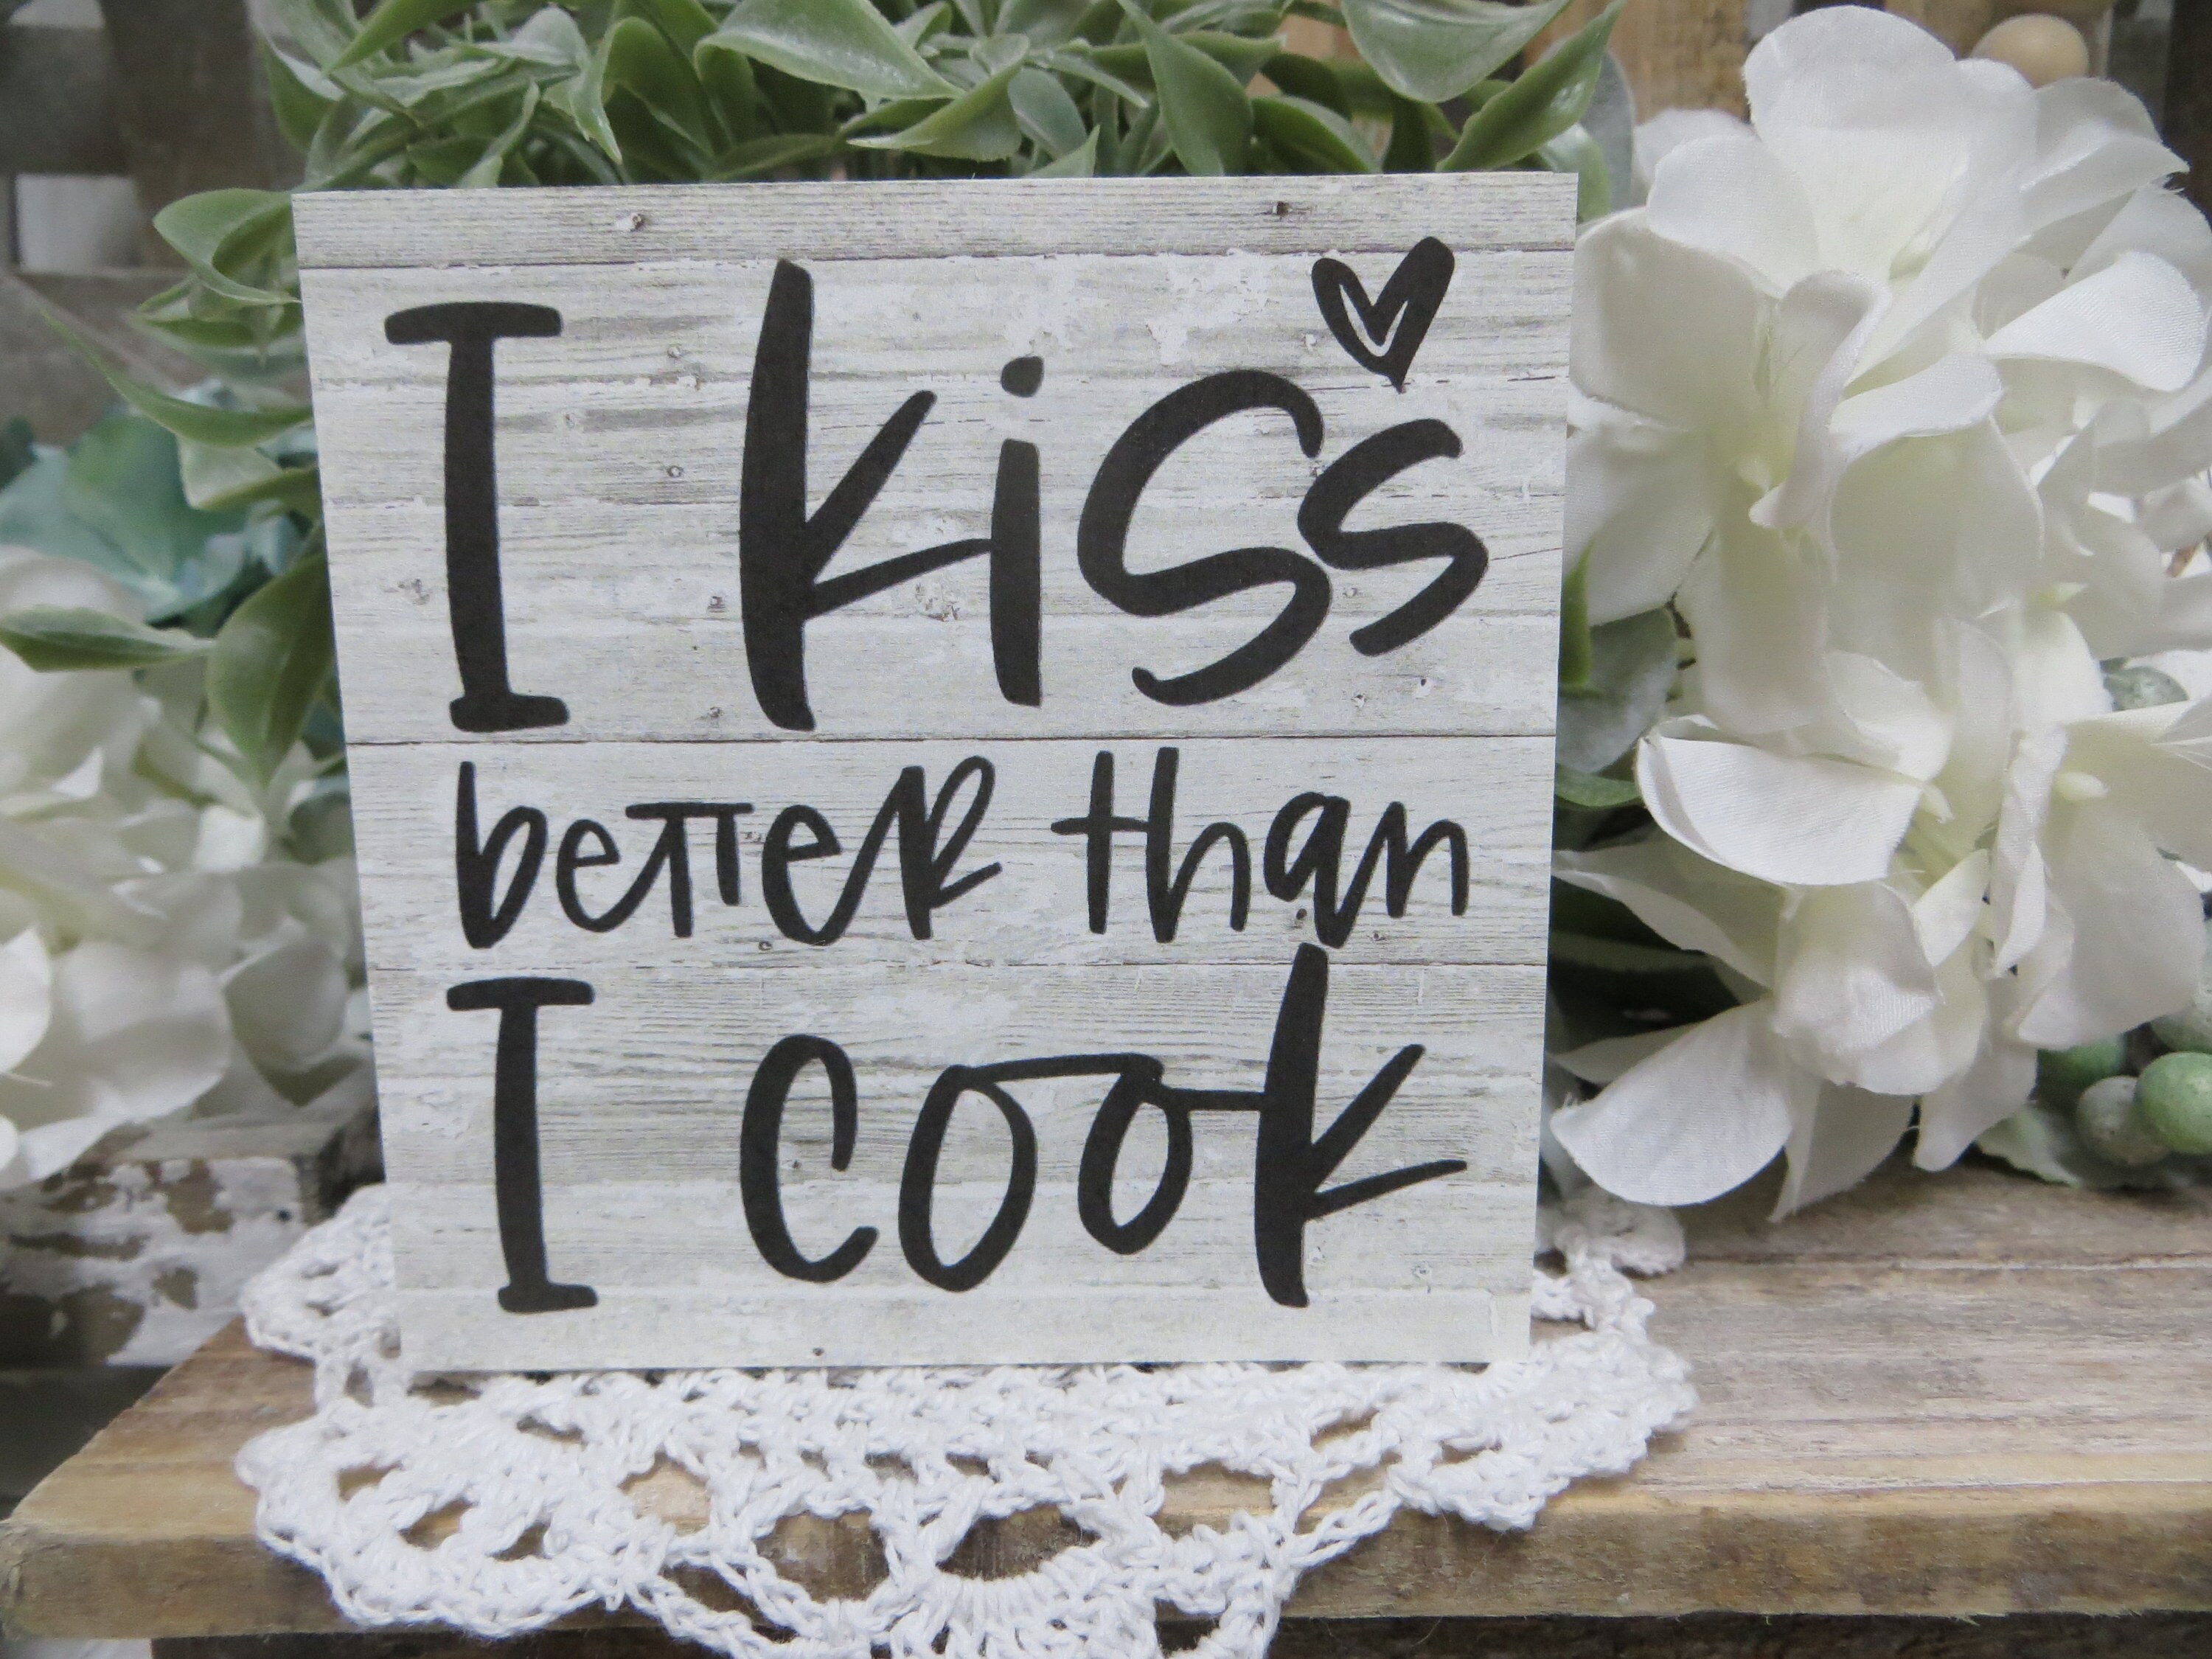 12x6 My Kitchen My Rules Wood Funny Kitchen Sign – Designs by Prim